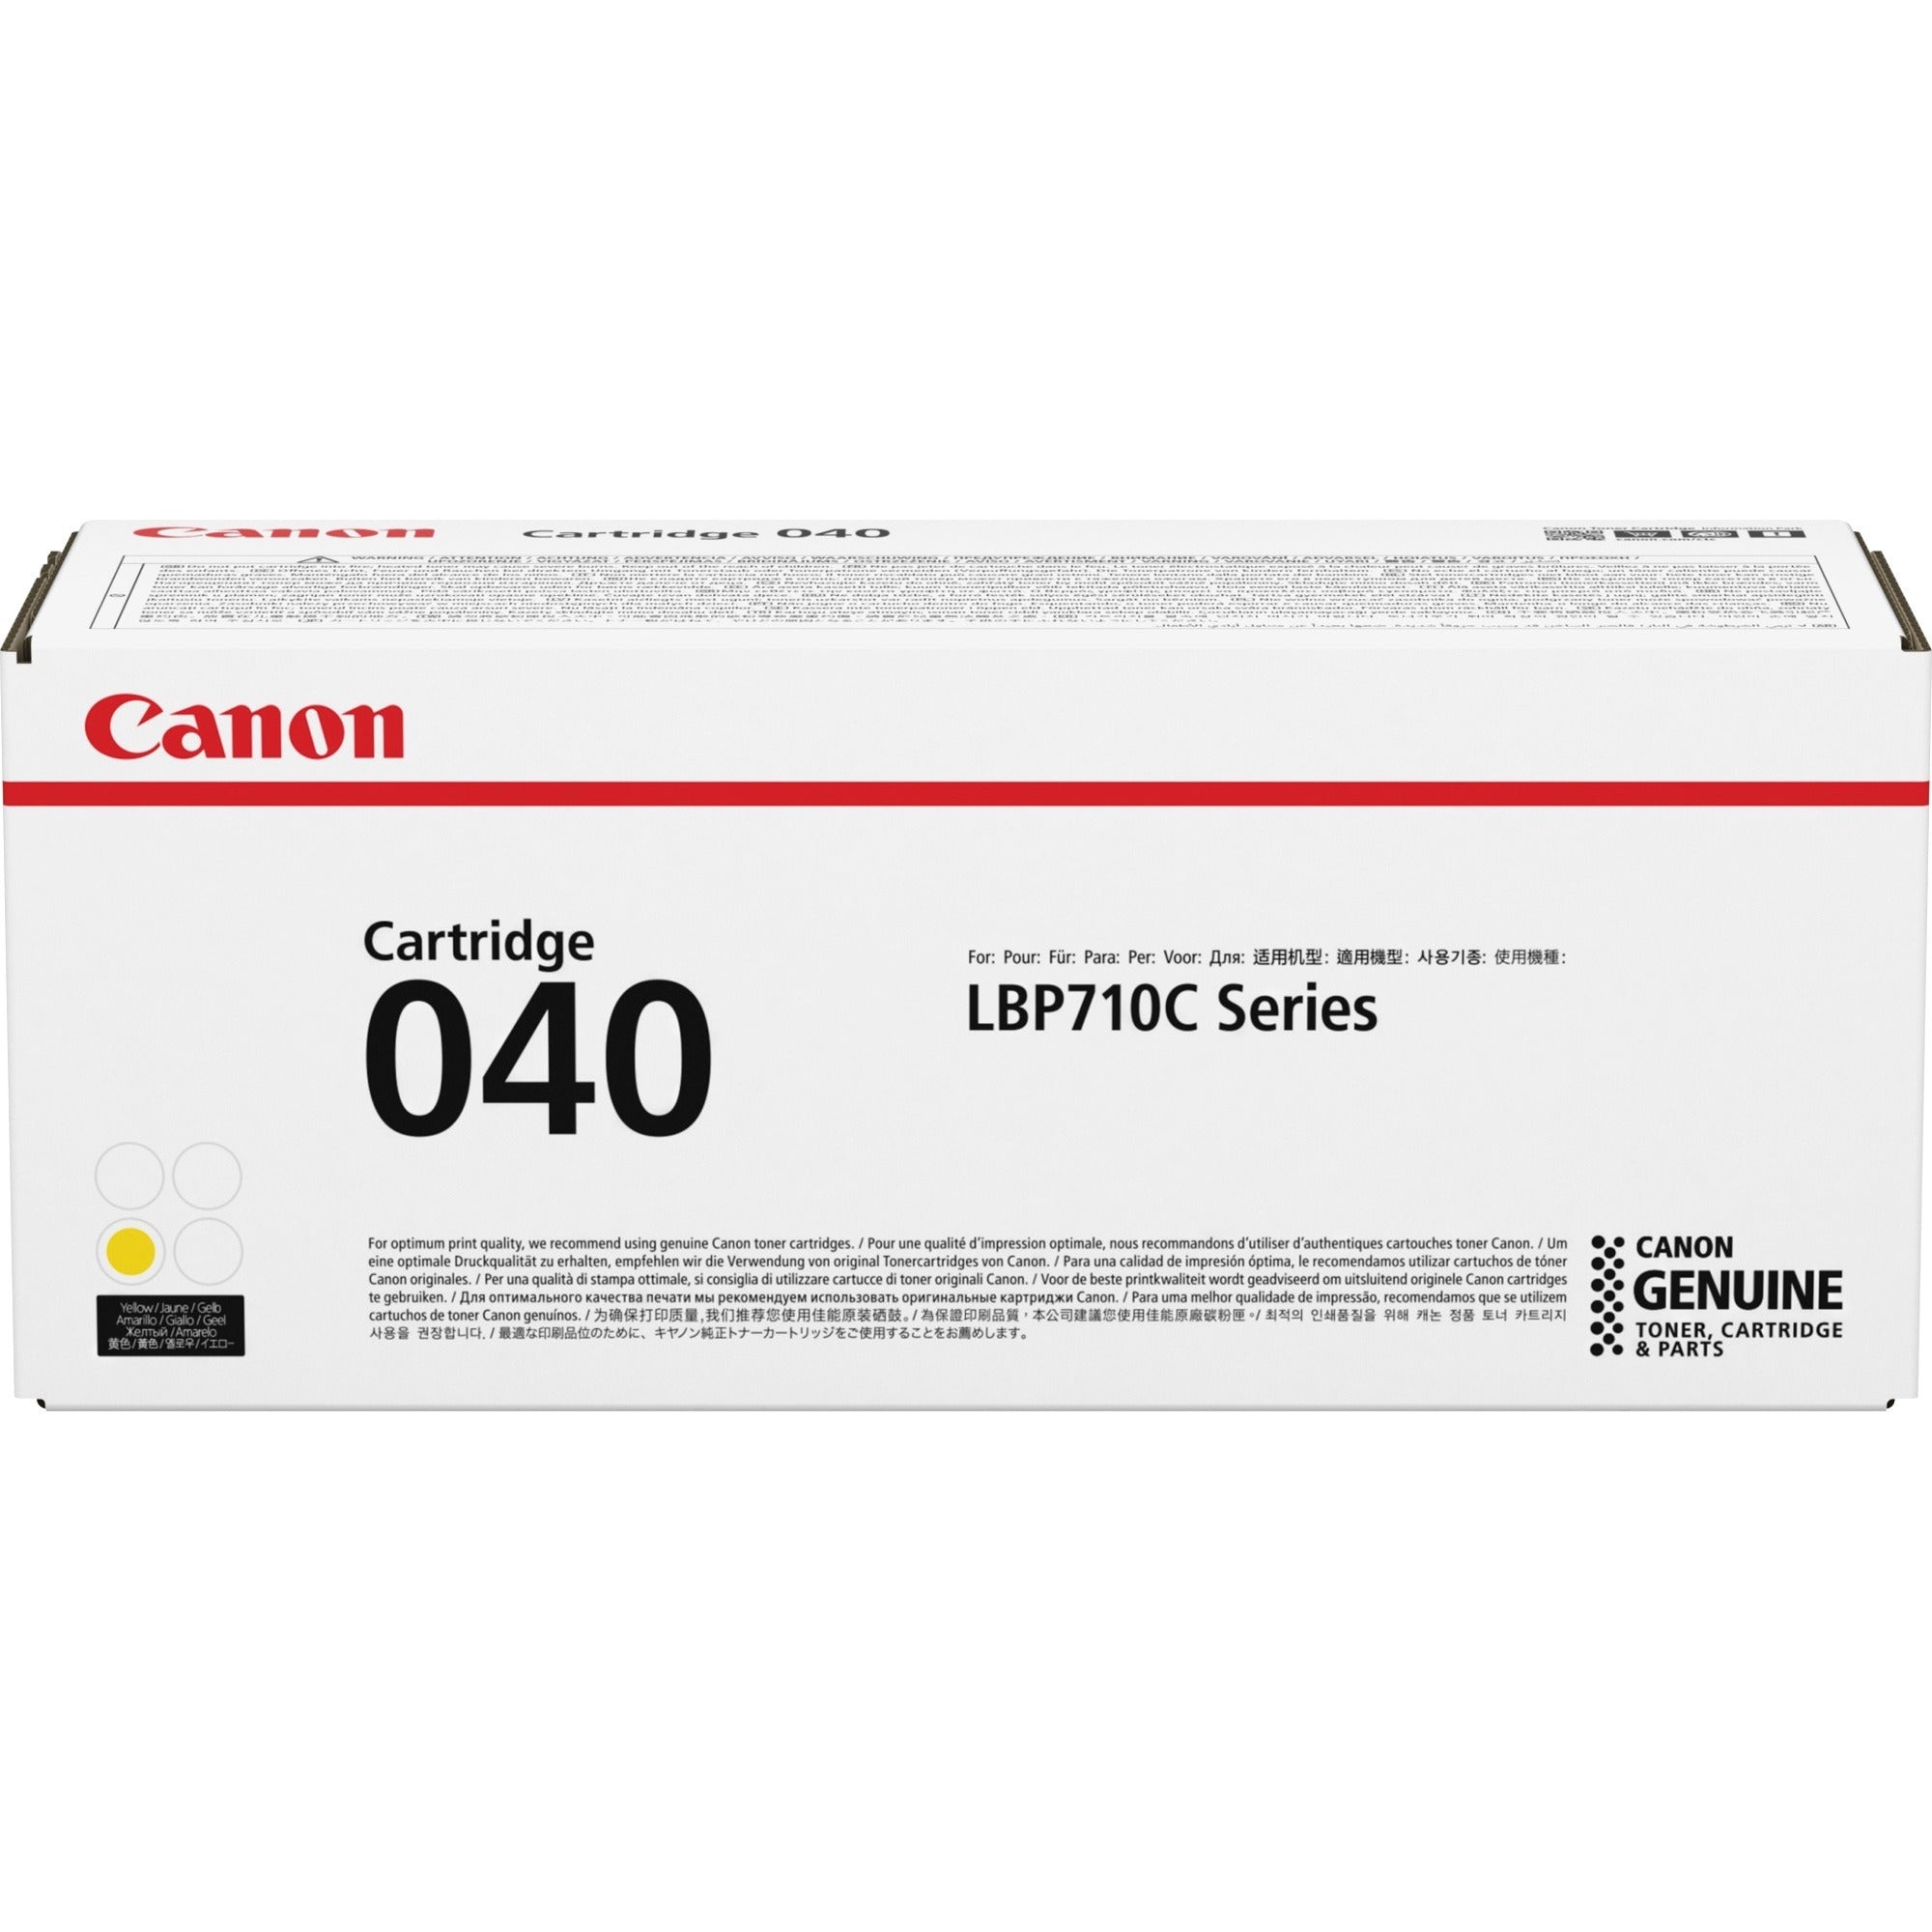 canon-toner-cartridge-laser-5400-pages-yellow-1-each_cnmcrtdg040y - 1